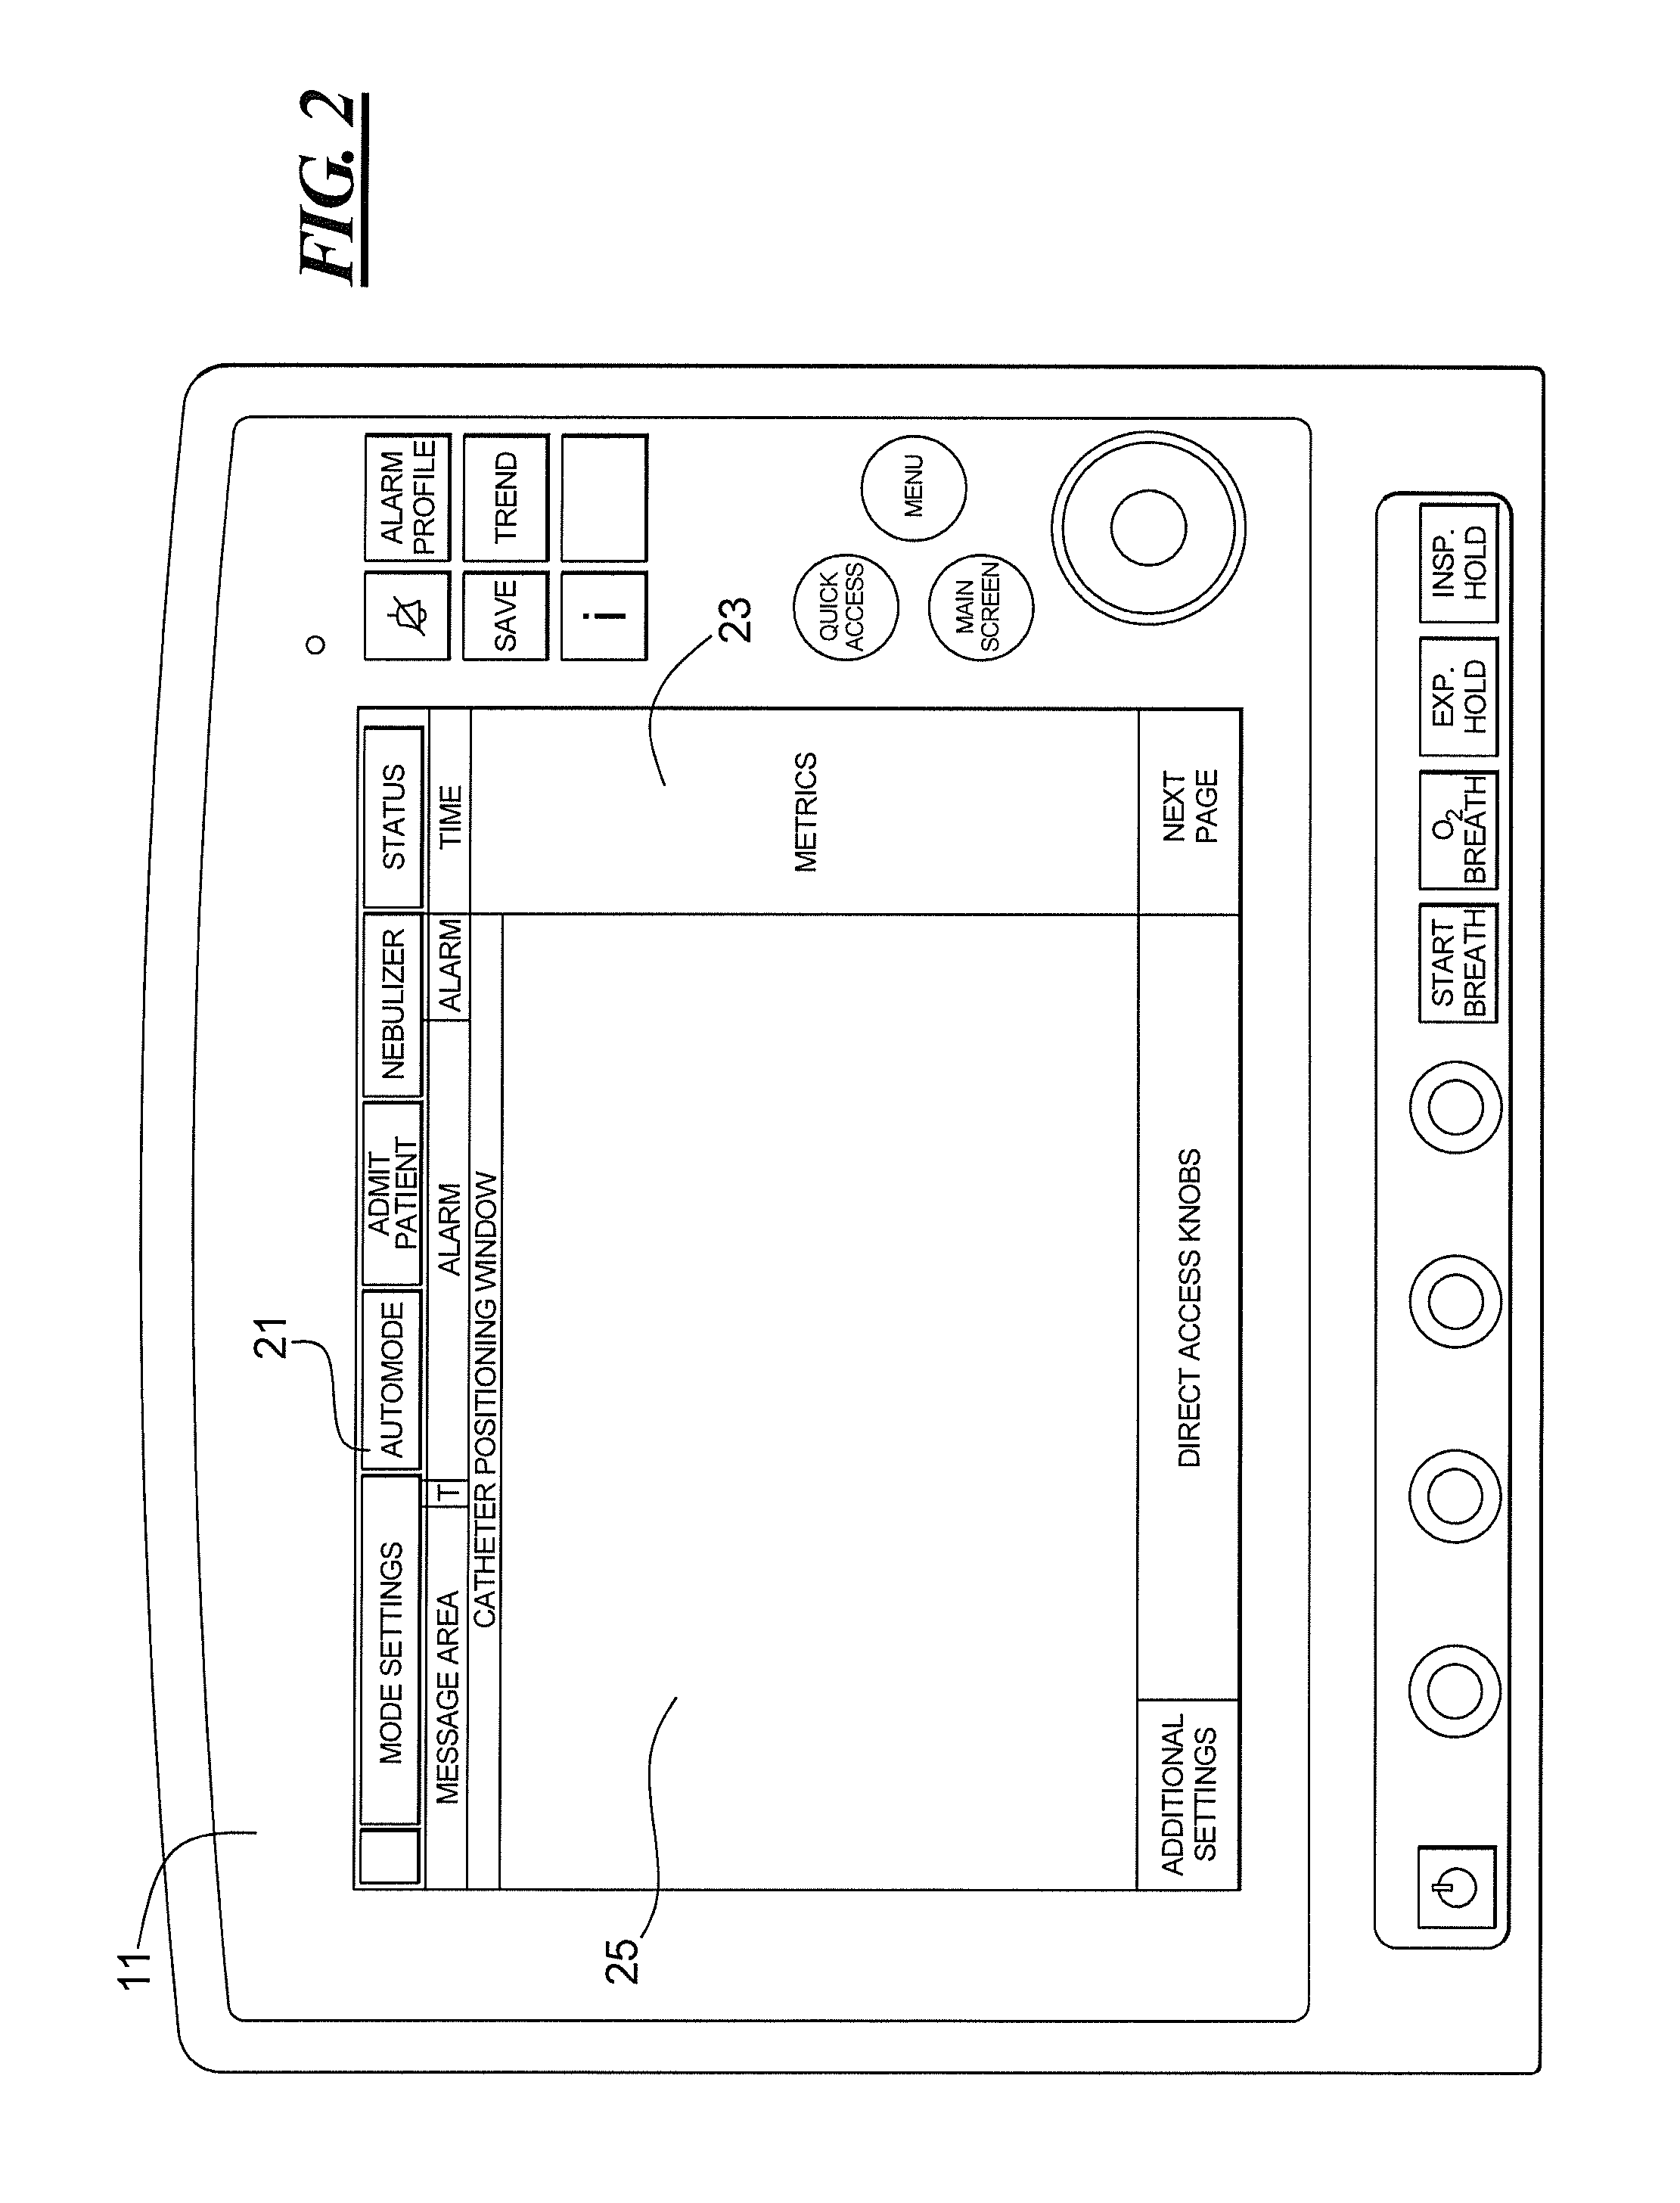 Control unit and display unit for an EMG controlled ventilator